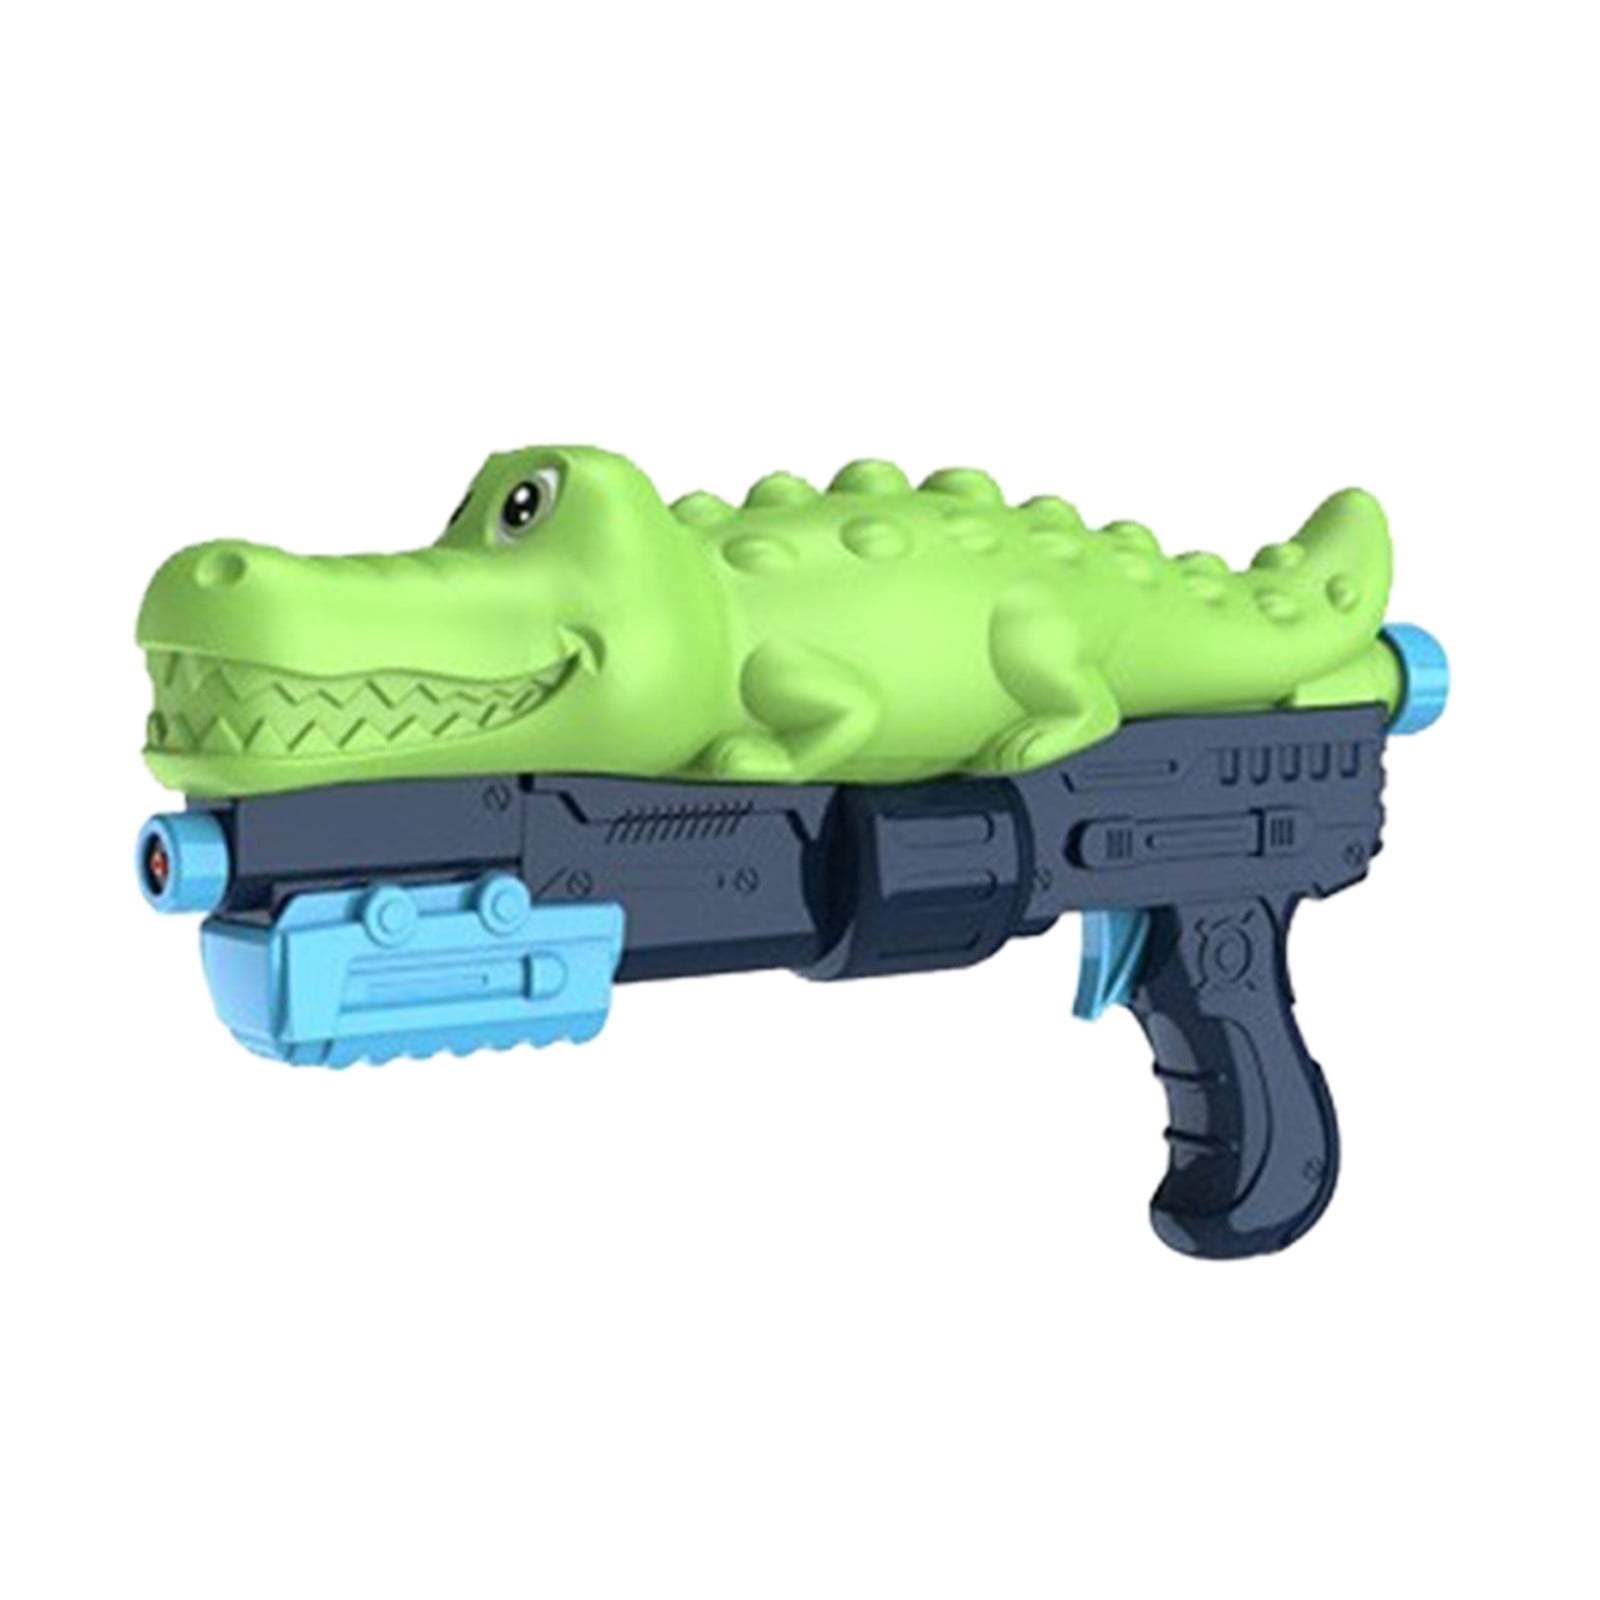 No Fear Unisexe Forever Watergun Childrens Toy Sports Sport 